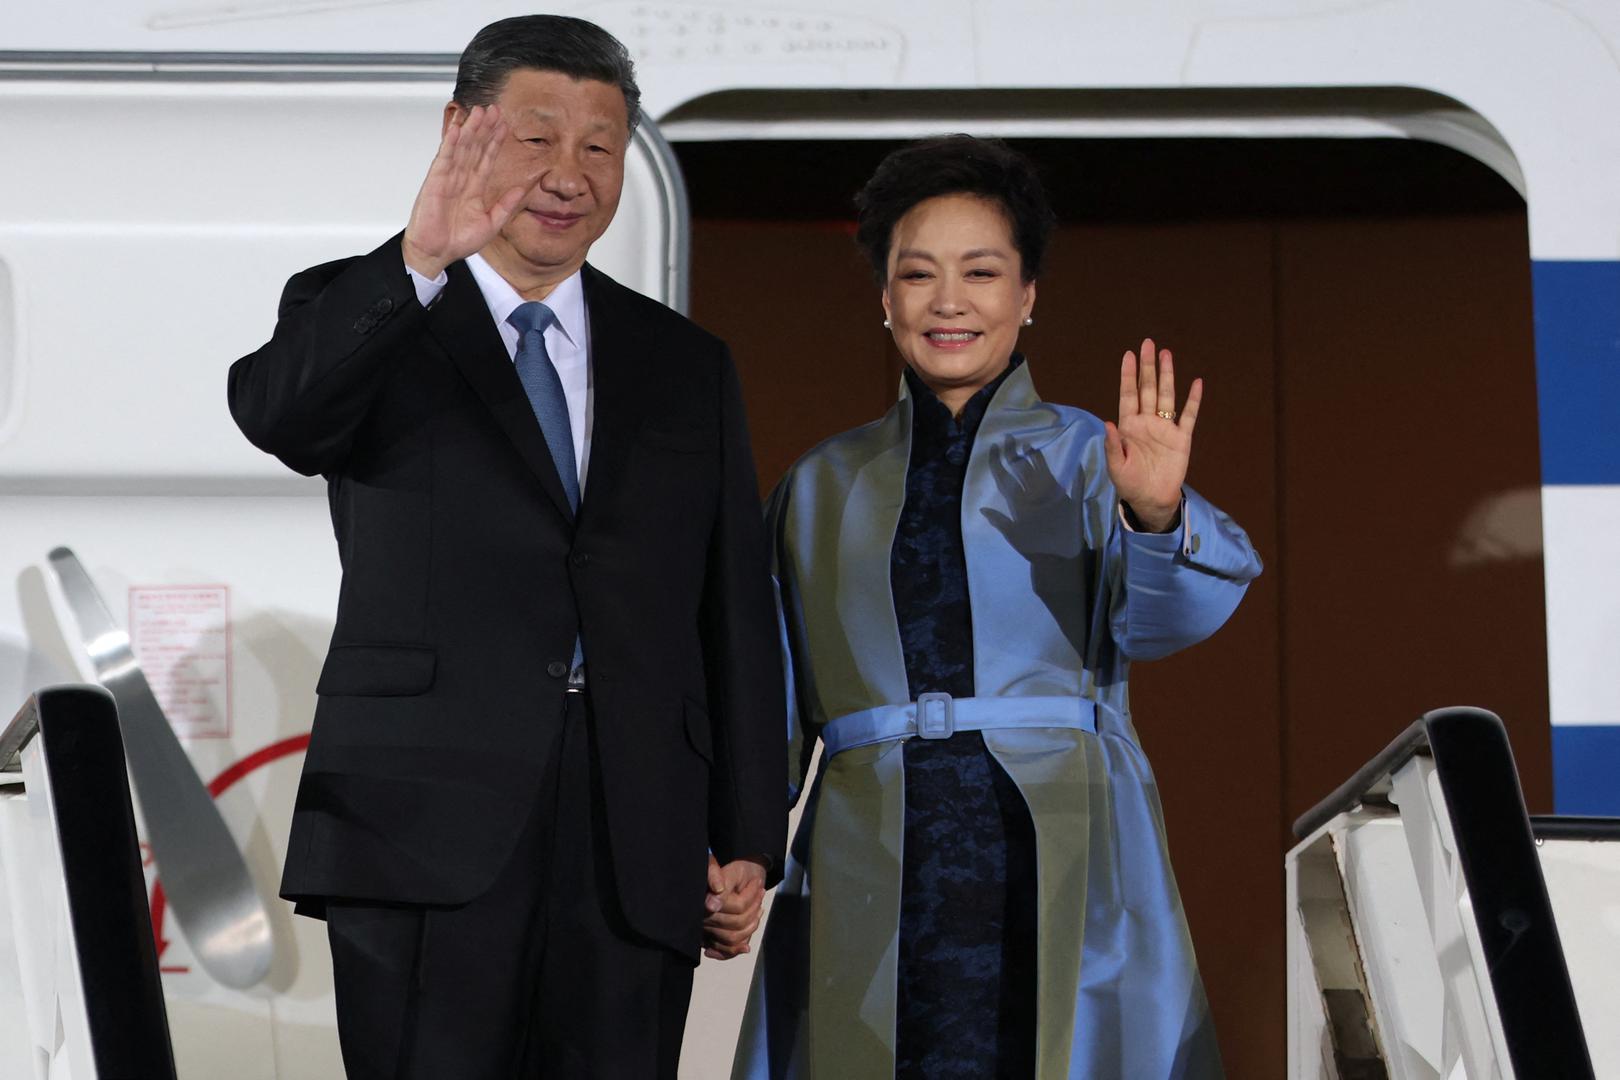 China's President Xi Jinping and his wife Peng Liyuan wave upon their arrival for an official two-day state visit, at Nikola Tesla Airport in Belgrade, Serbia, May 7, 2024. REUTERS/Marko Djurica Photo: MARKO DJURICA/REUTERS